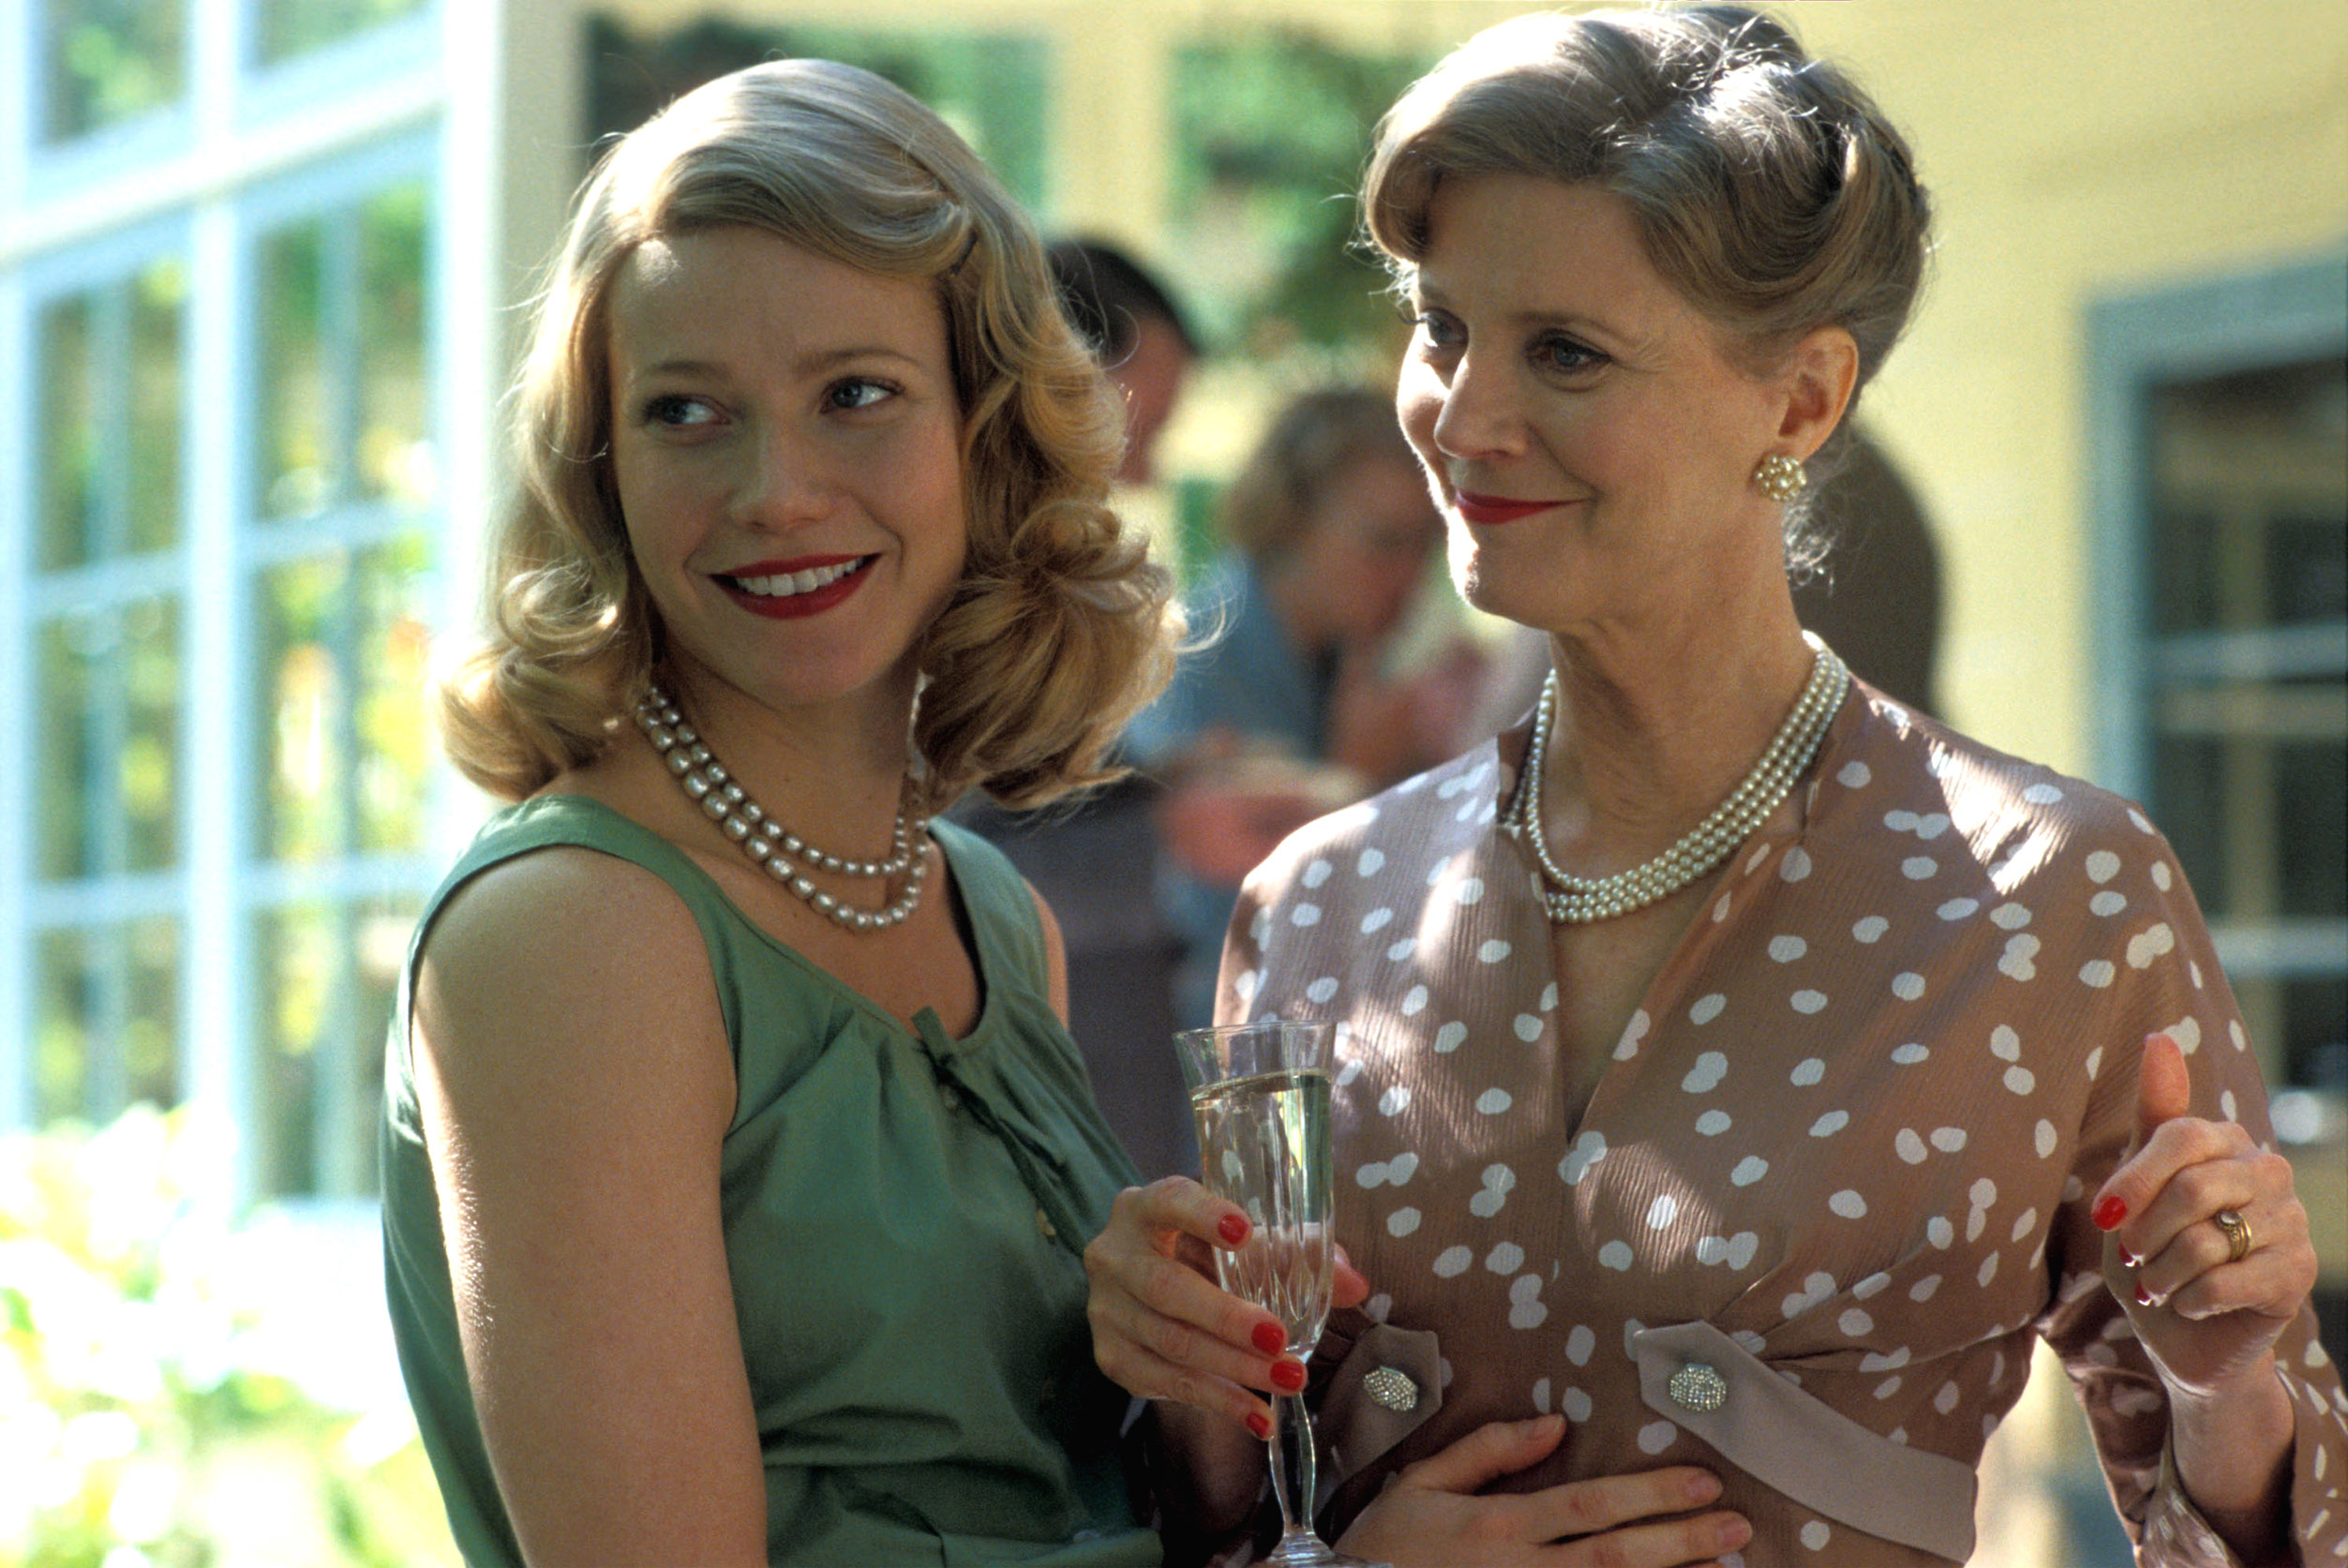 Actresses in period attire with pearls, one in a polka dot dress, holding champagne, in a TV or movie scene